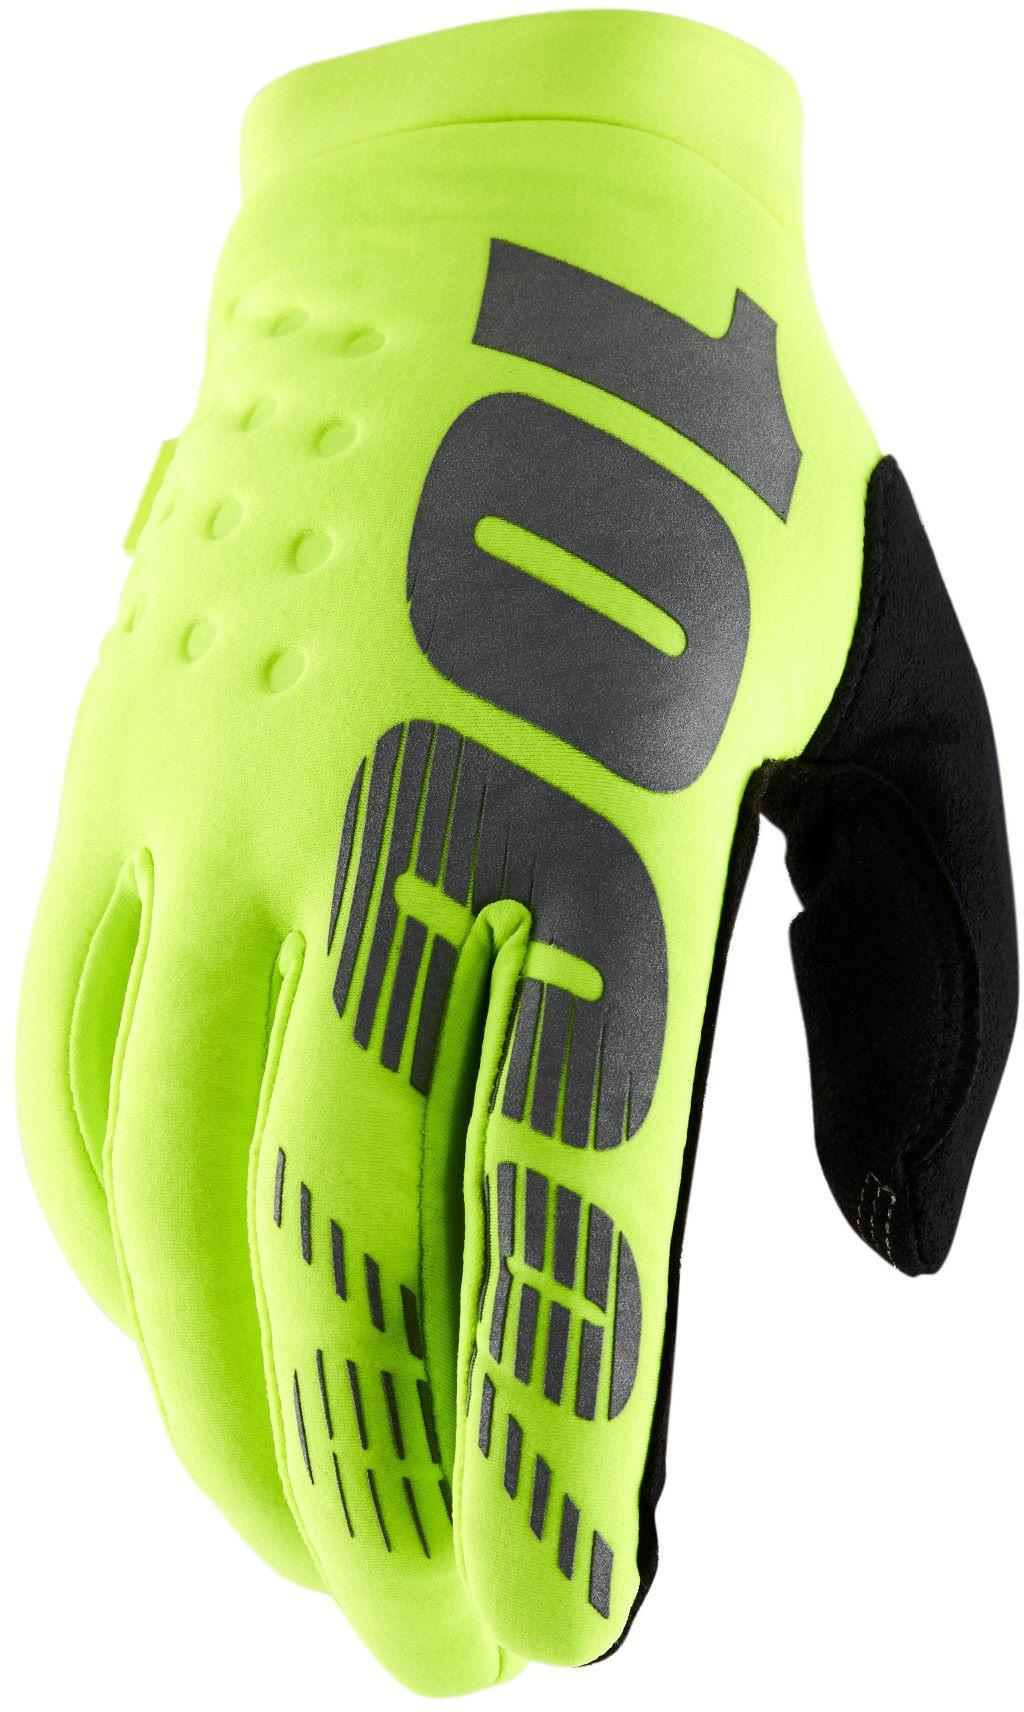 100% Brisker Youth Gloves - Fluorescent/yellow